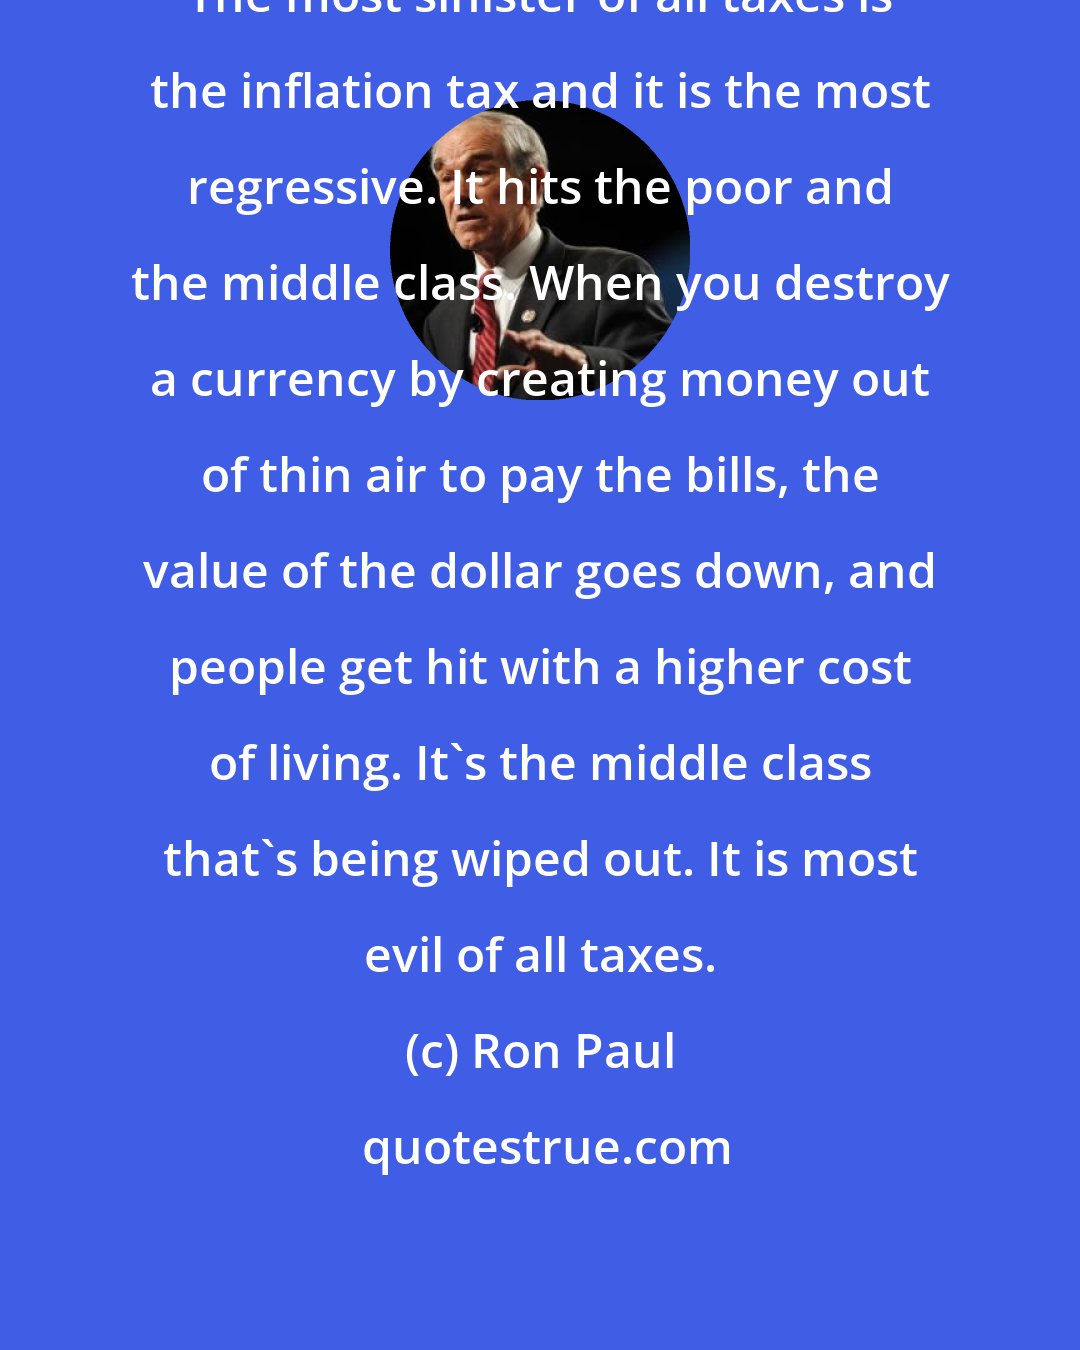 Ron Paul: The most sinister of all taxes is the inflation tax and it is the most regressive. It hits the poor and the middle class. When you destroy a currency by creating money out of thin air to pay the bills, the value of the dollar goes down, and people get hit with a higher cost of living. It's the middle class that's being wiped out. It is most evil of all taxes.